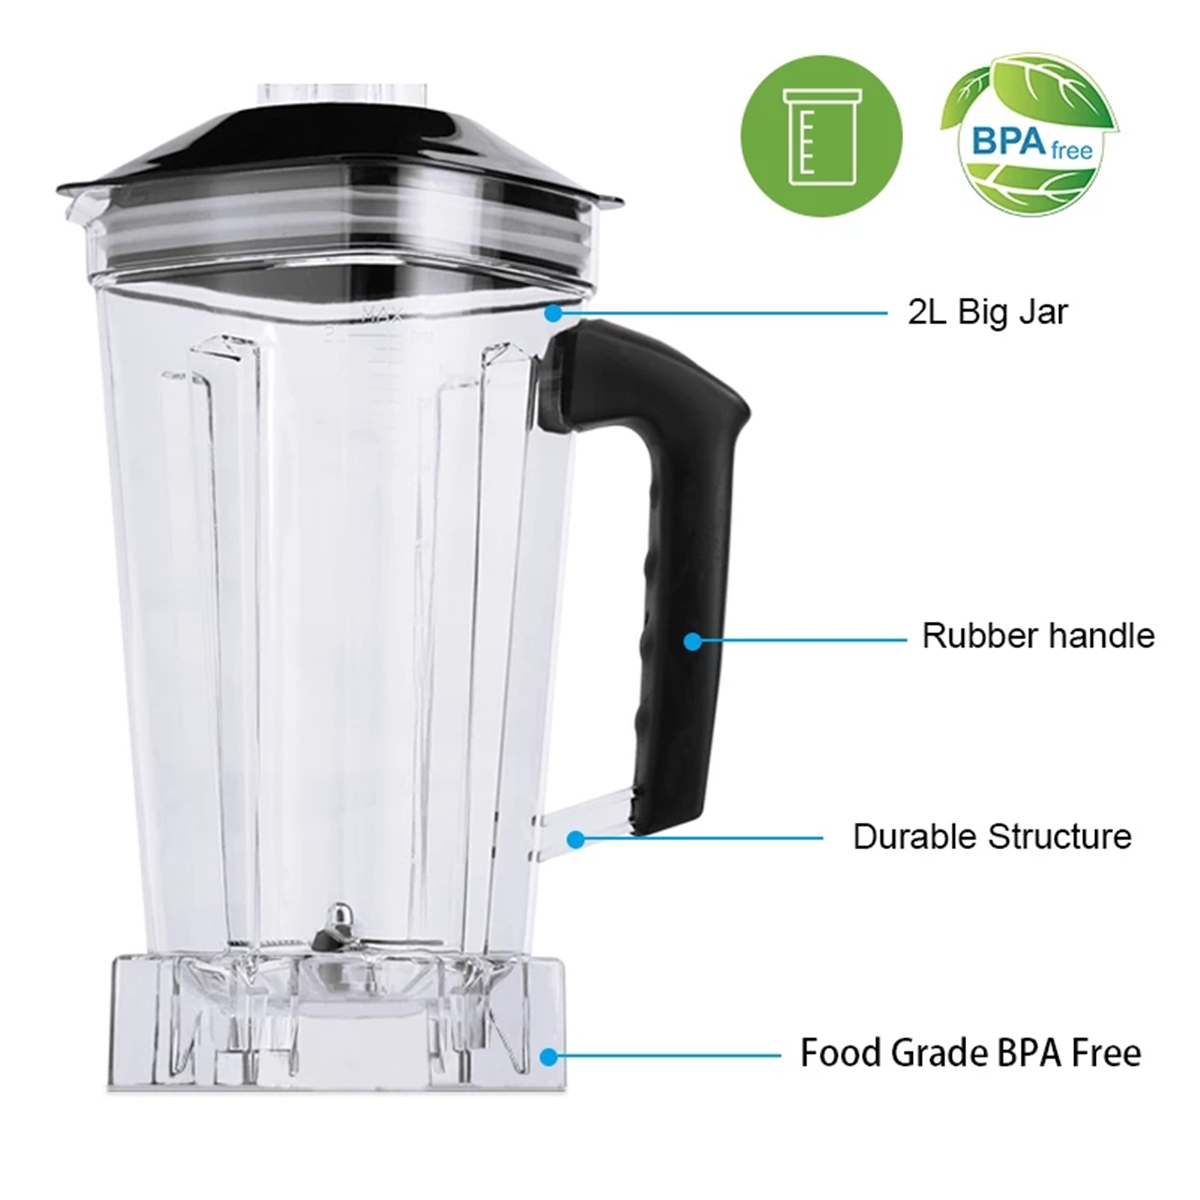 Digital-3HP-BPA-FREE-2L-Automatic-Touchpad-Professional-Blender-Mixer-Juicer-1848947-10